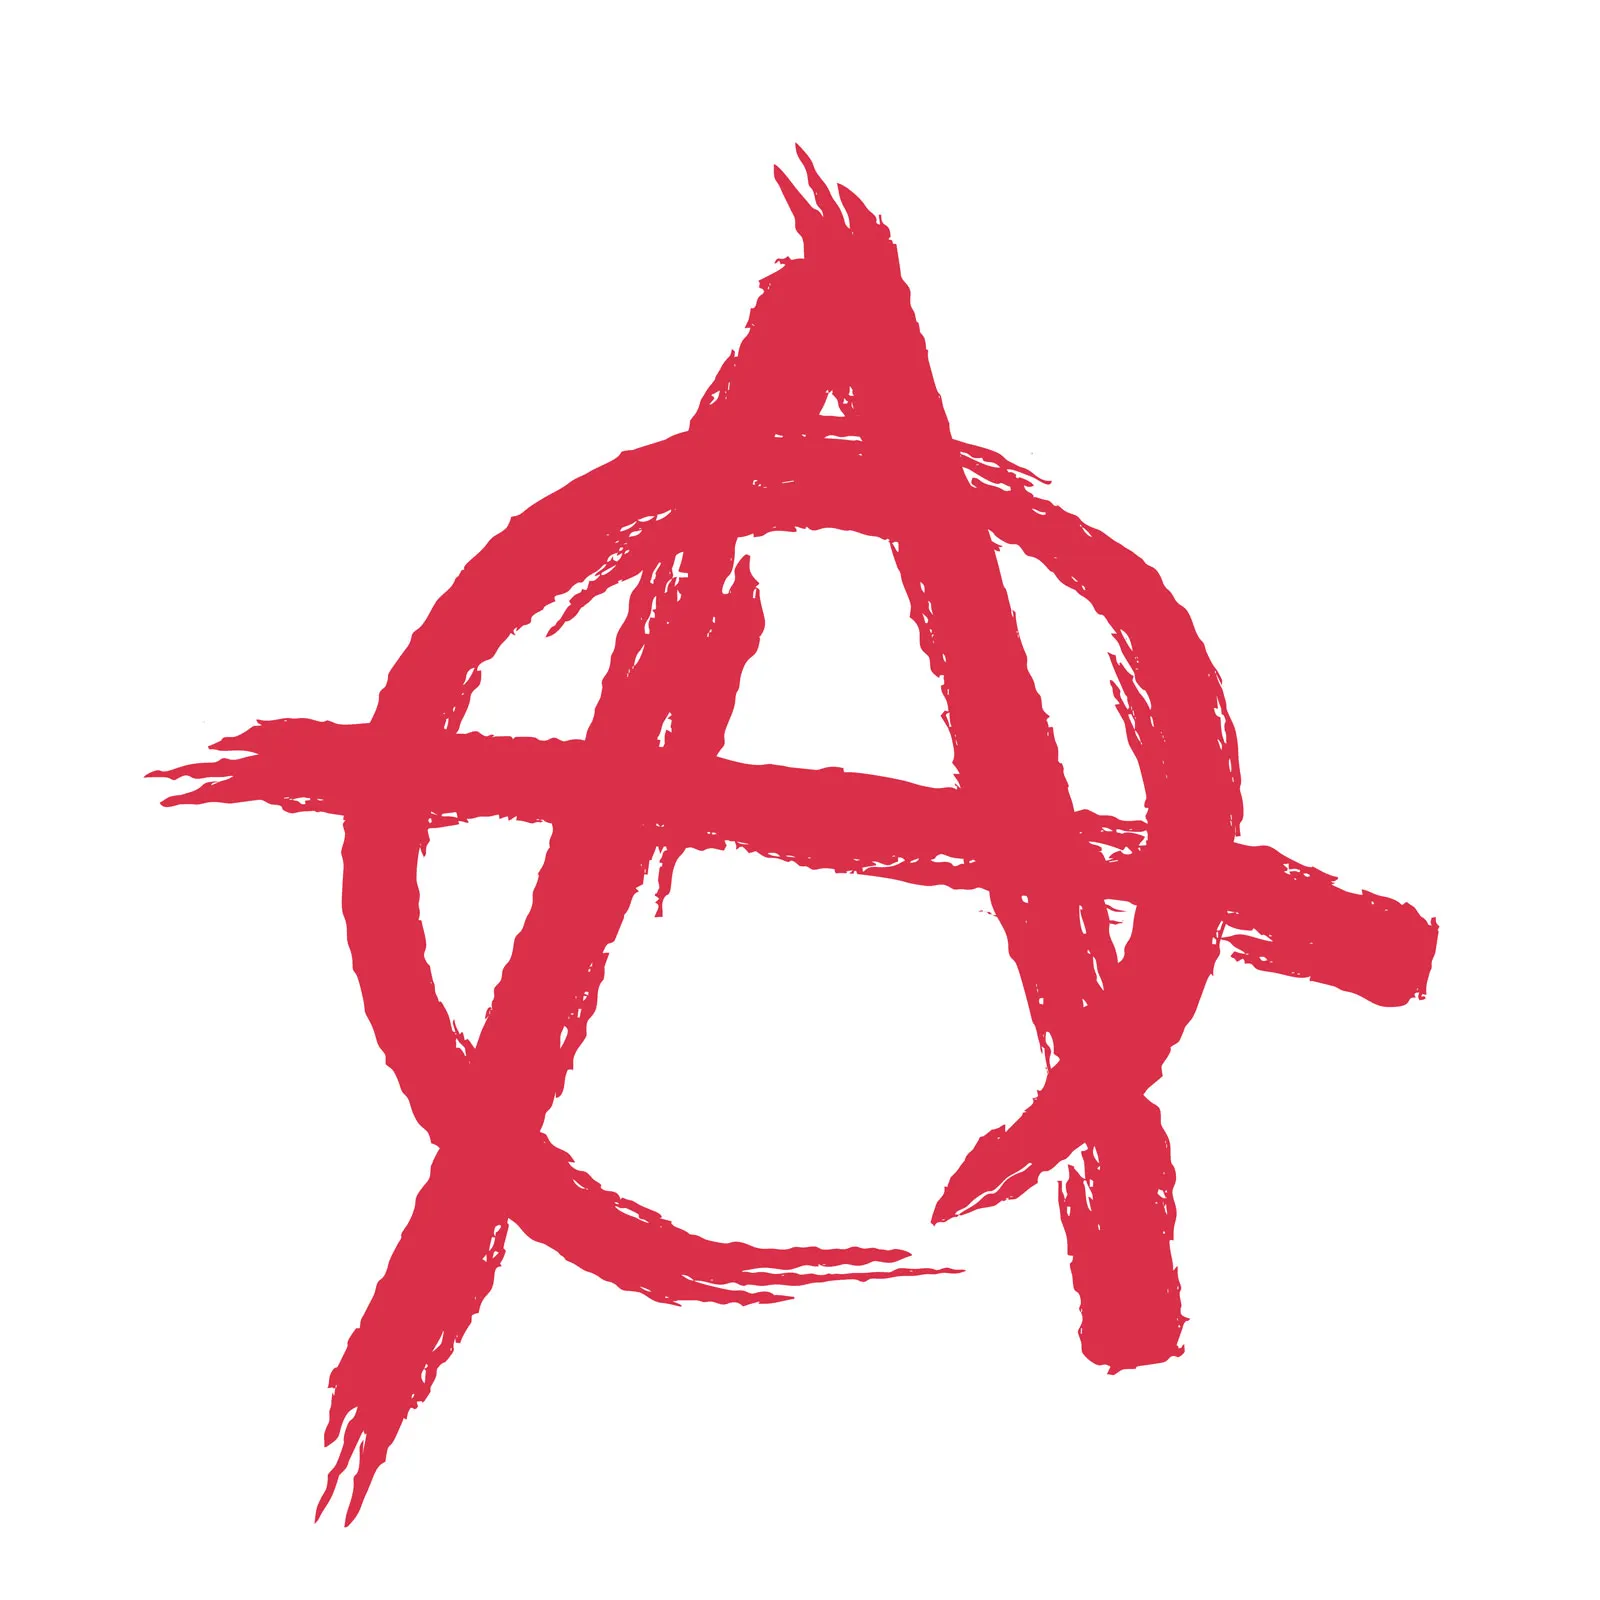 TRAC Insight: Anarchists Motivations, Targets, and Tactics; A 2022 Round Up - 3 January 2023